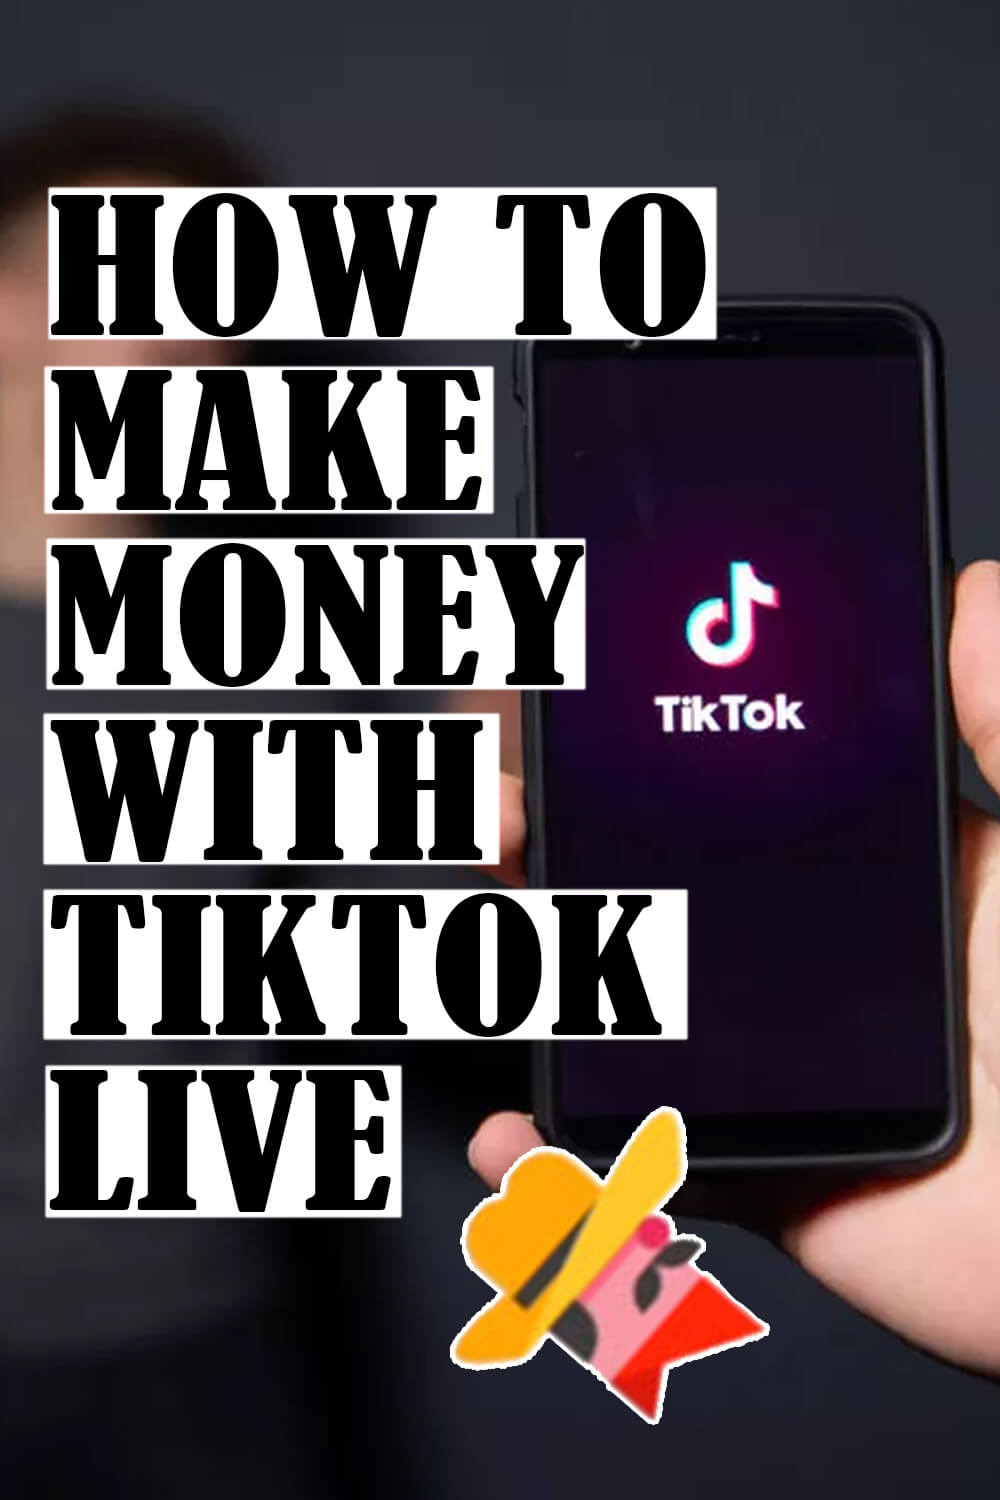 for that Secrets to make money live streaming on facebook was